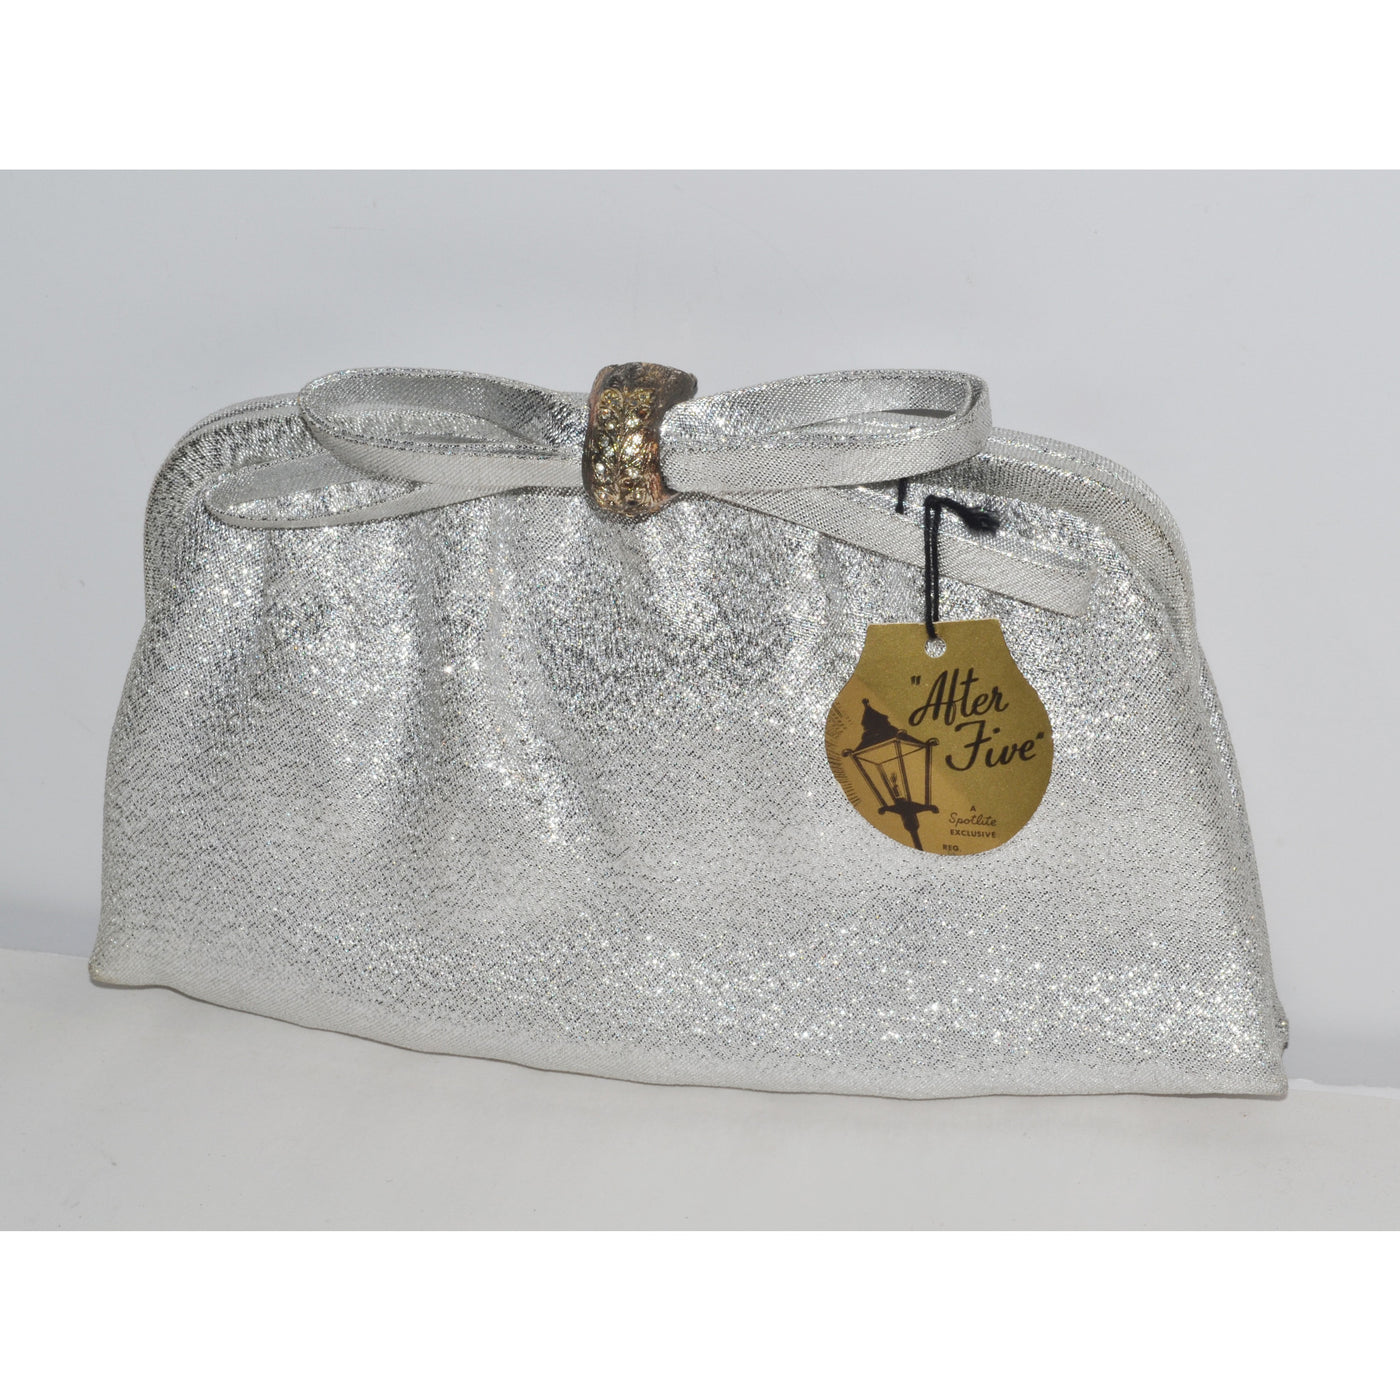 Vintage Silver Lame Rhinestone Purse By After Five 